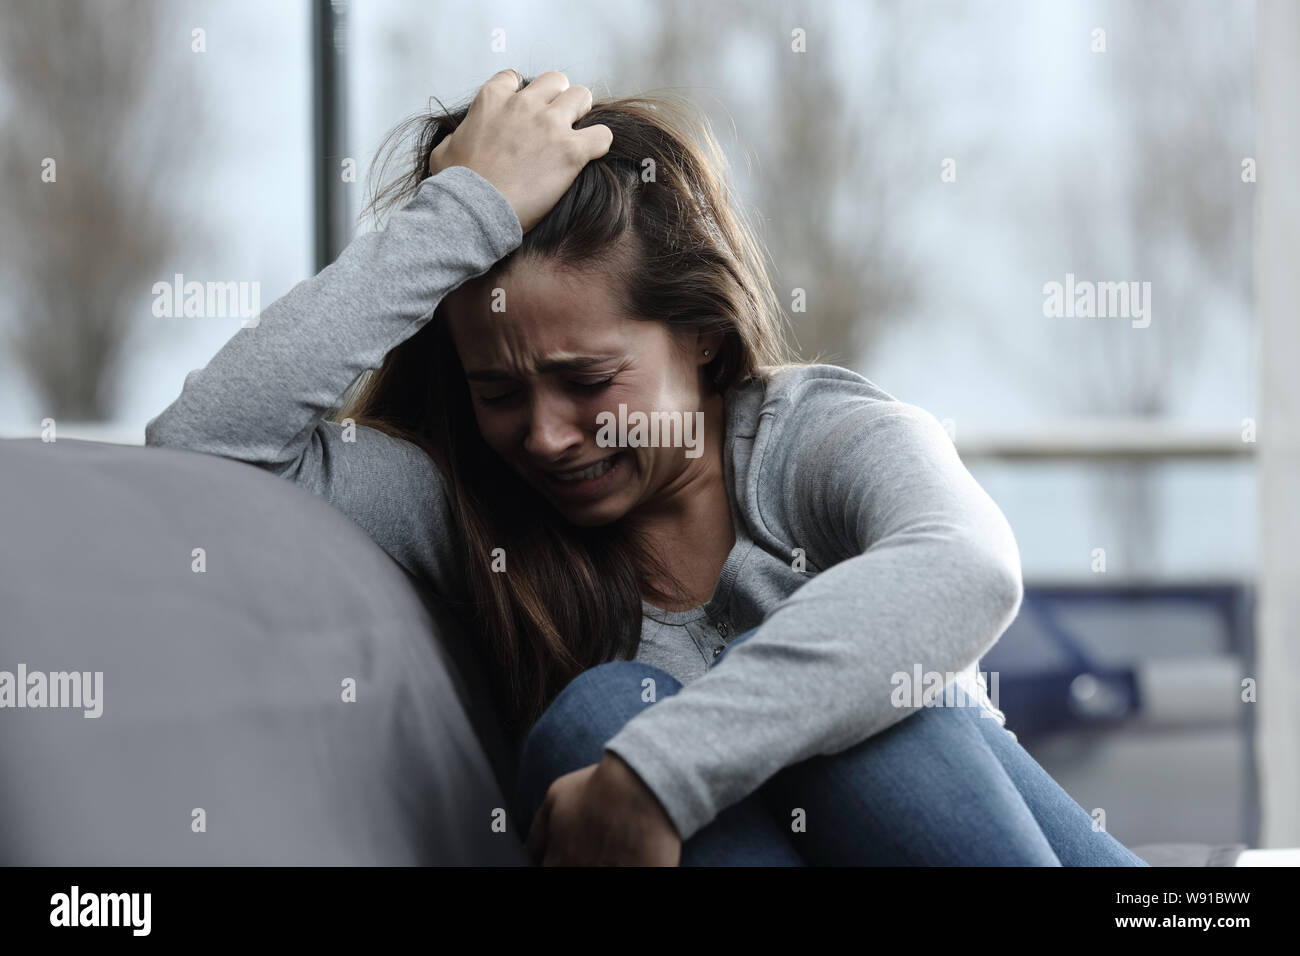 Sad girl complaining and crying alone sitting on a couch in the living room at home Stock Photo